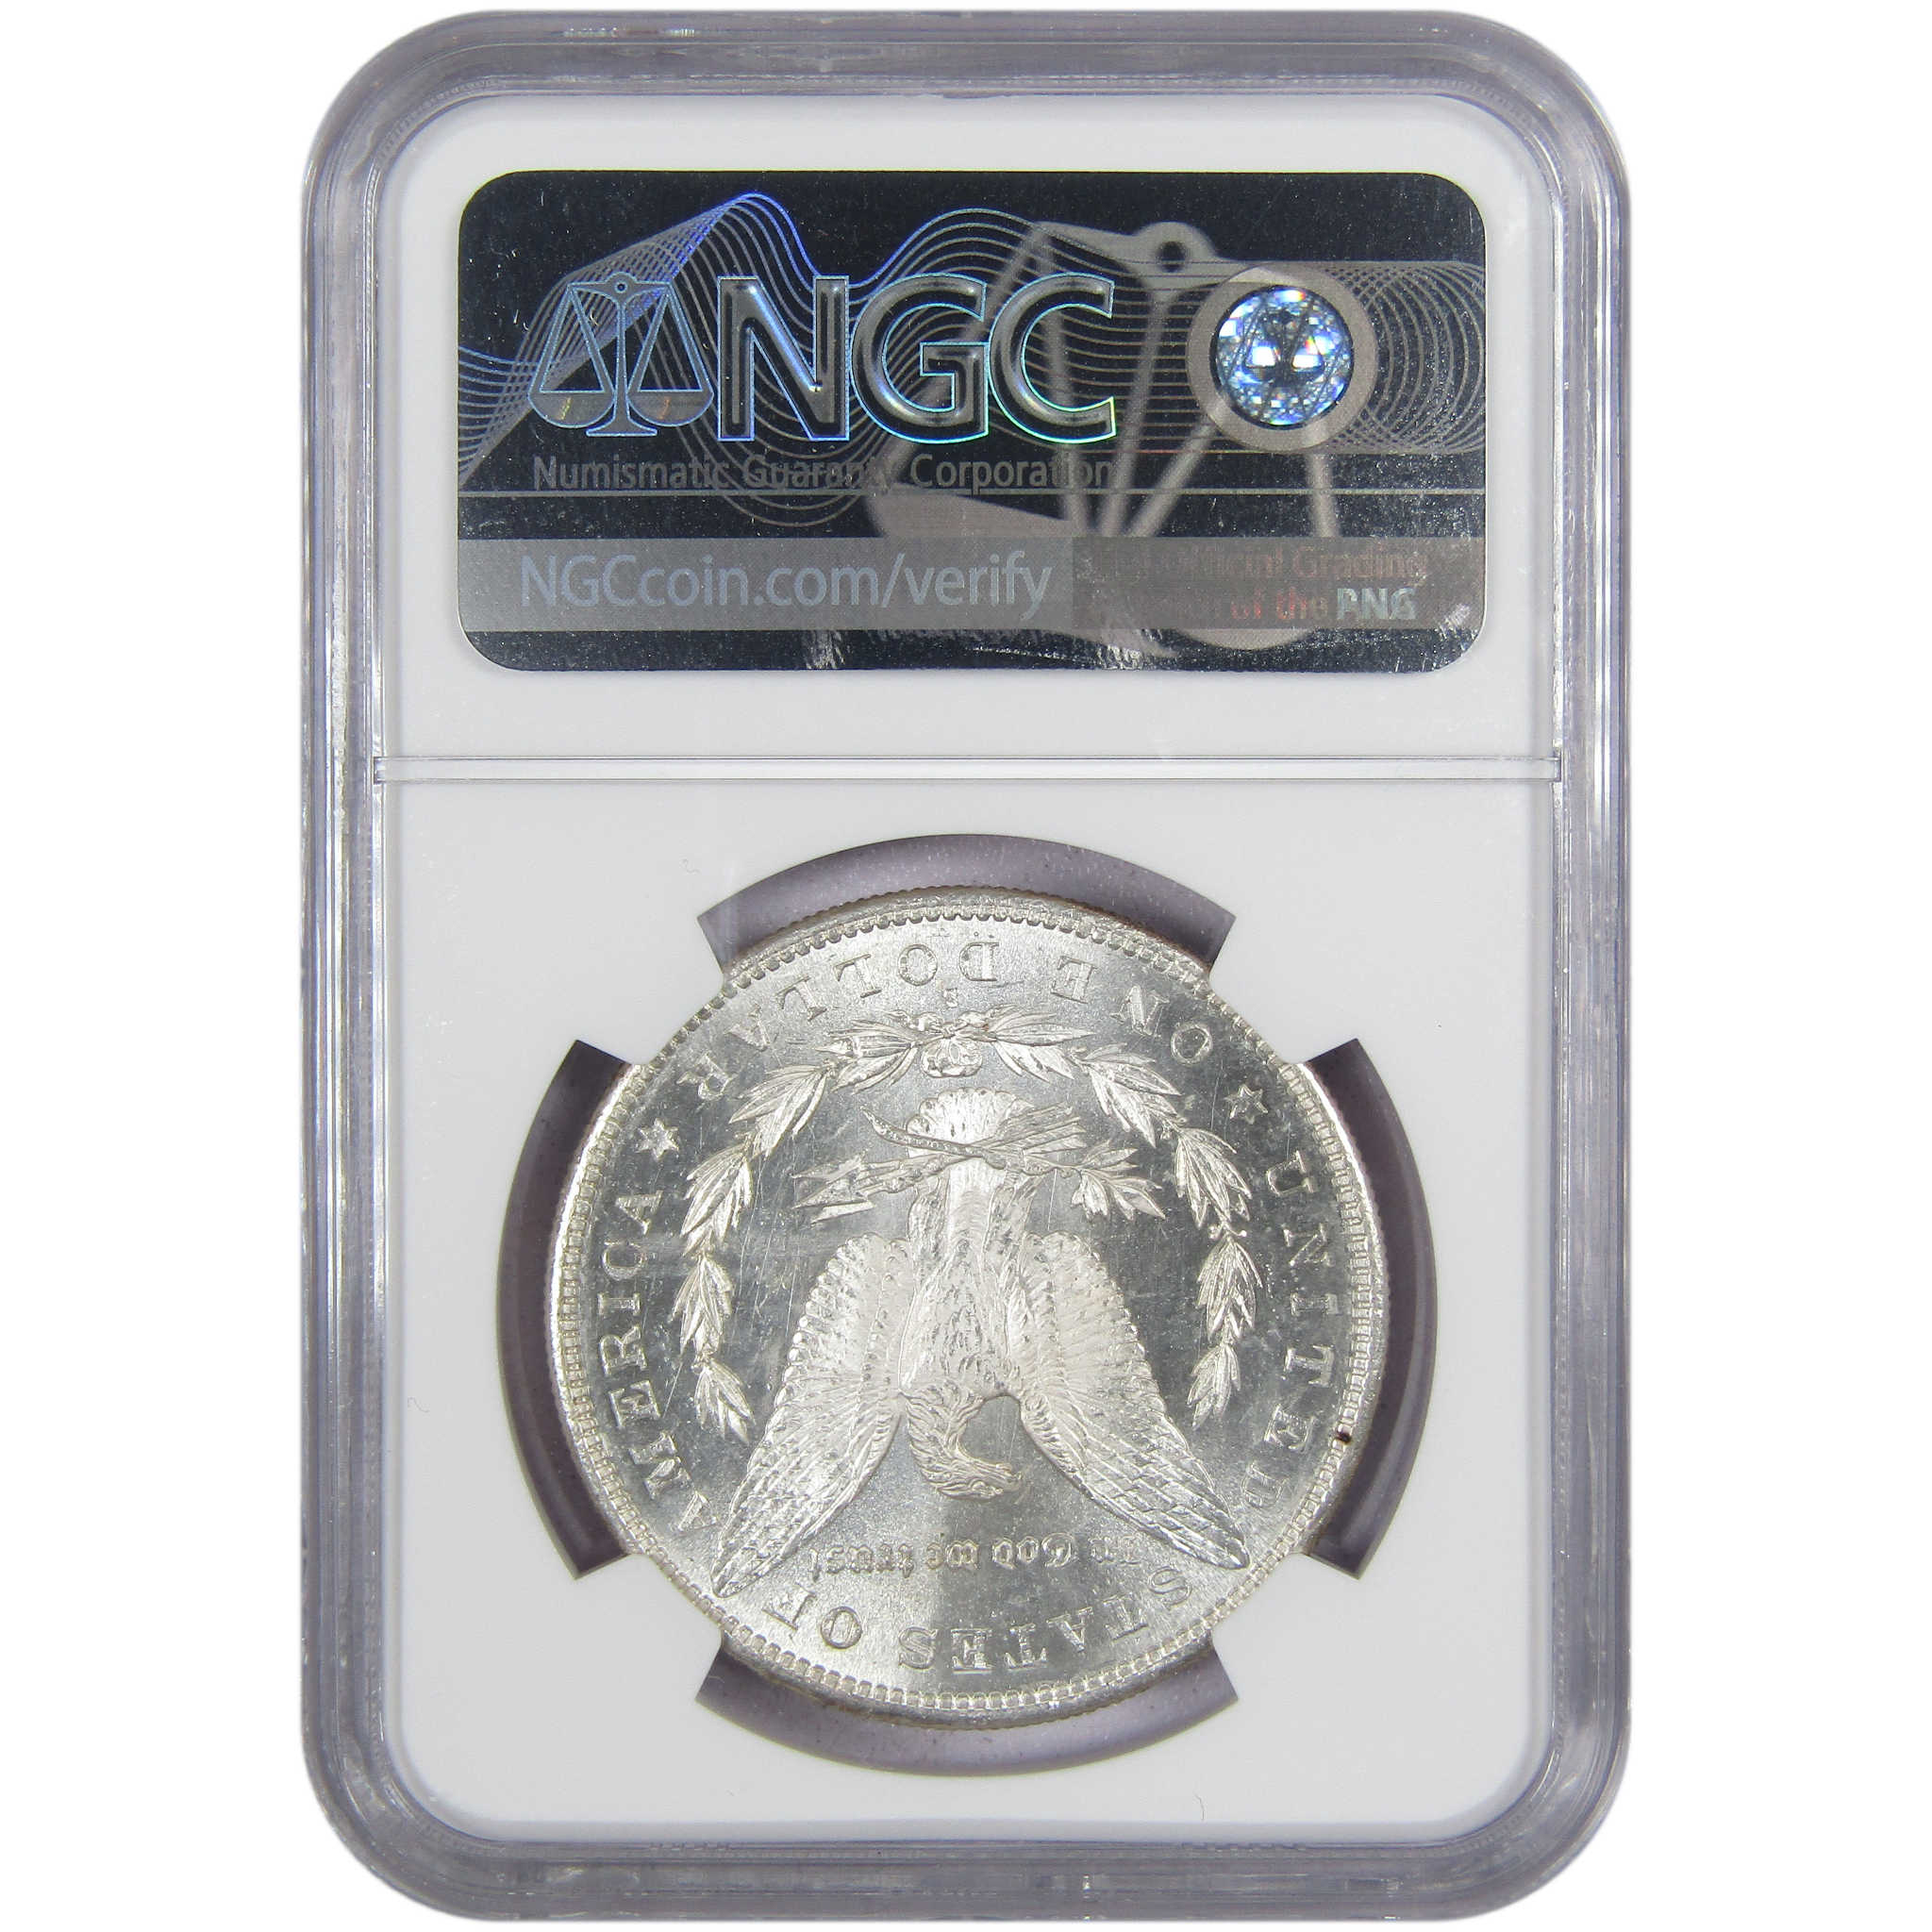 1885 S Morgan Dollar MS 61 NGC 90% Silver Uncirculated SKU:IPC5683 - Morgan coin - Morgan silver dollar - Morgan silver dollar for sale - Profile Coins &amp; Collectibles